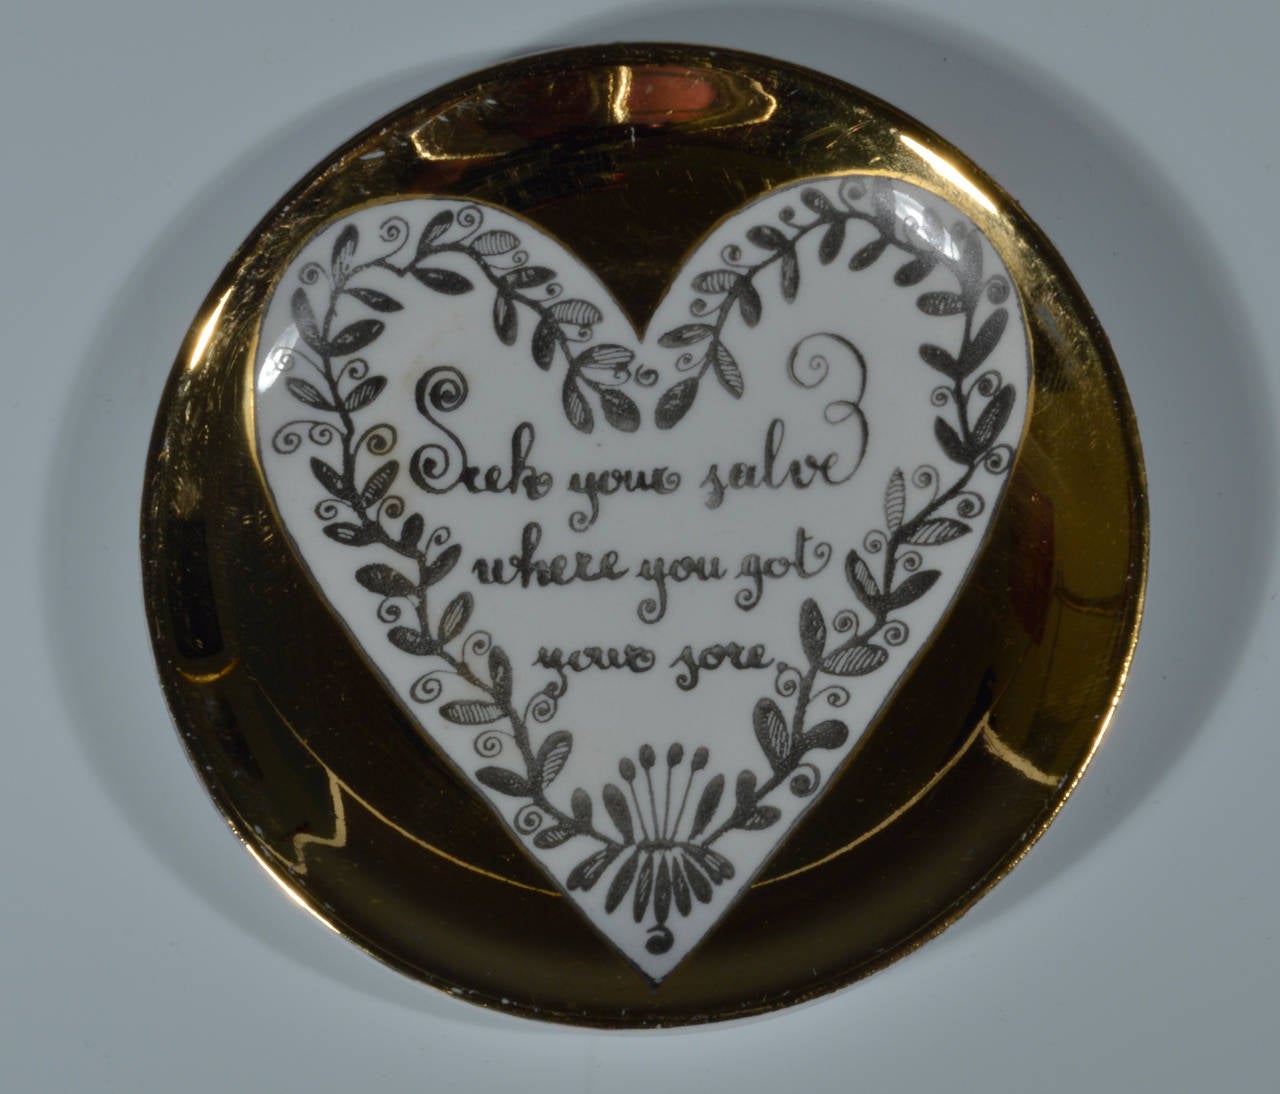 Piero Fornasetti Porcelain Boxed Coaster Set with Love, Hearts and Sayings 1